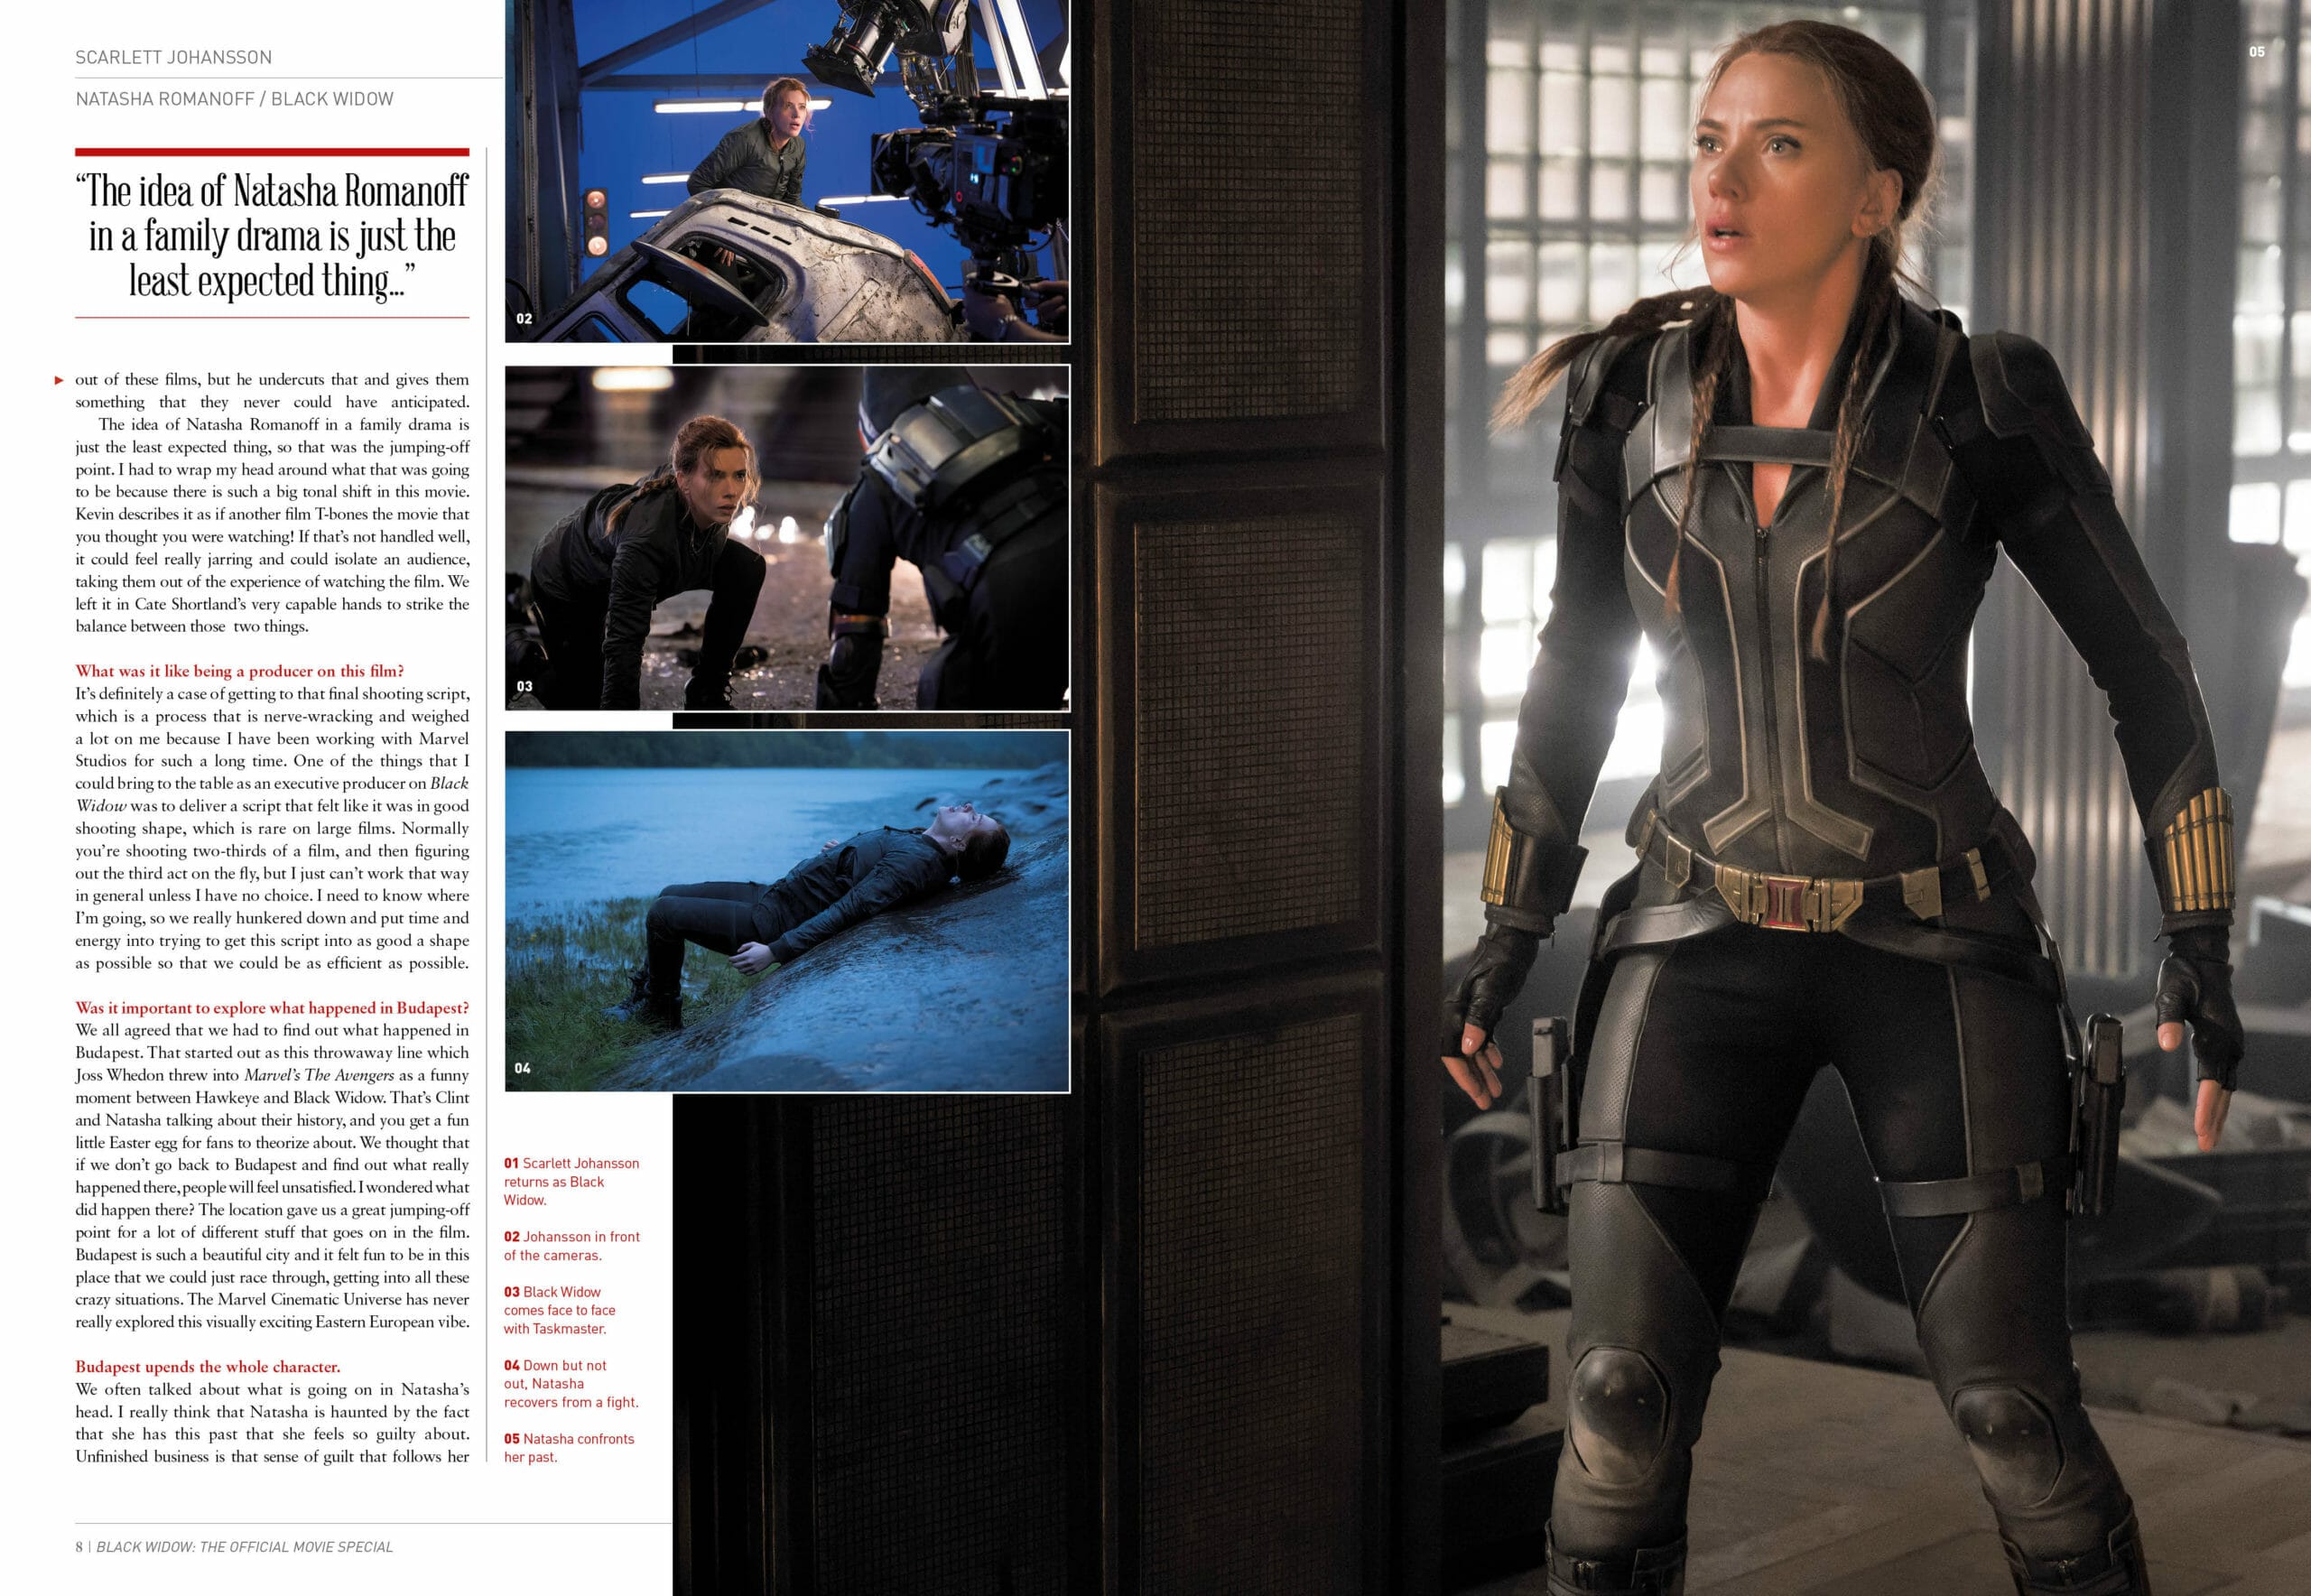 Marvel Studio's Black Widow - The Official Movie Special Book